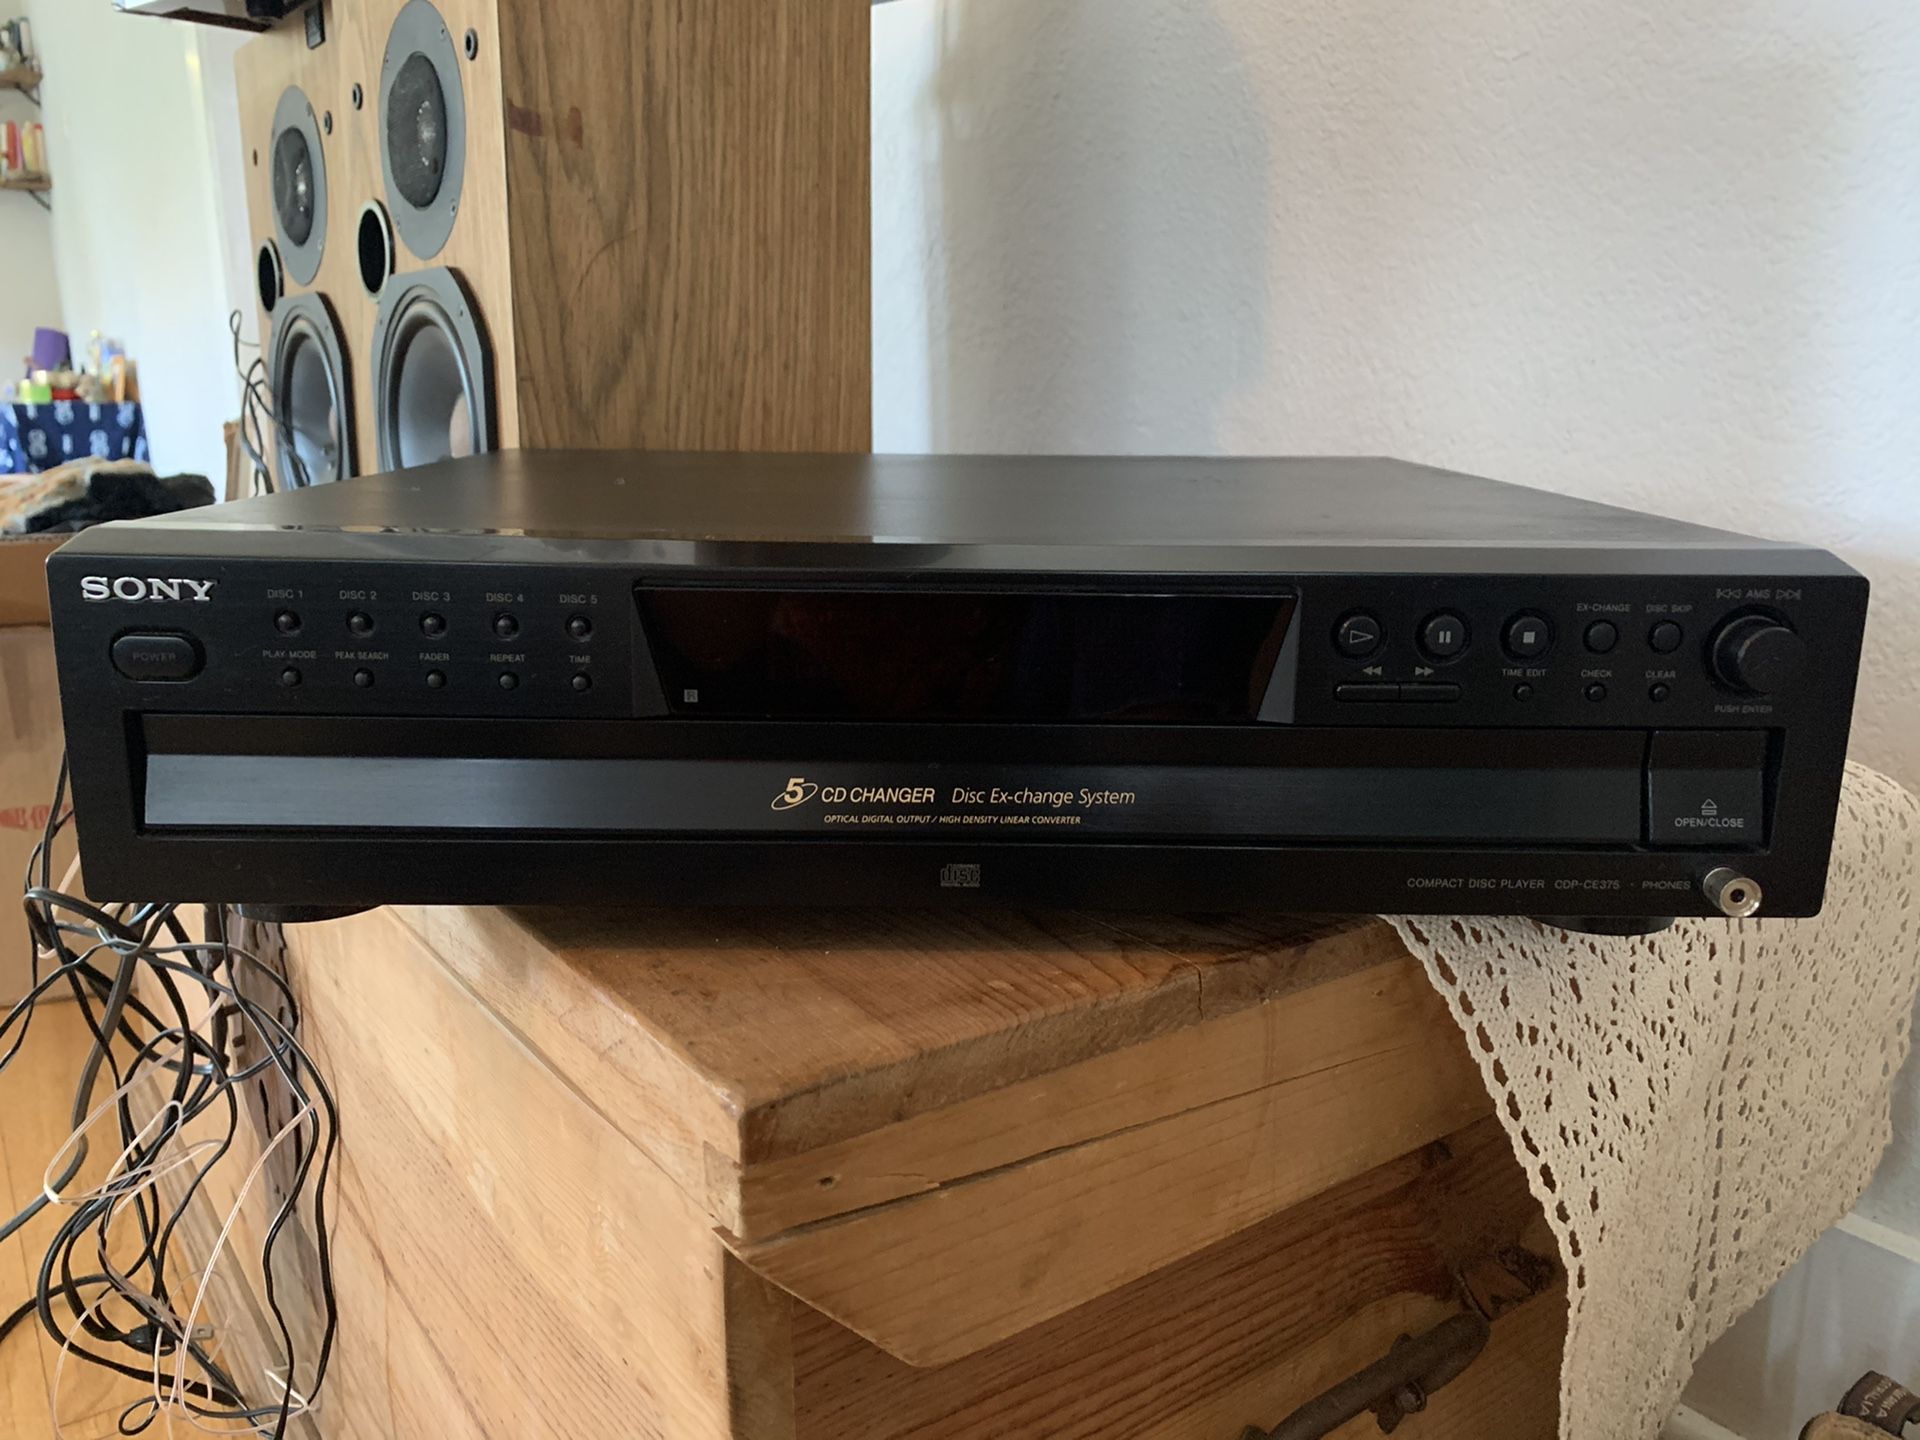 Sony Compact Disc Player 5 CD Changer Disc Exchange System CDP-CE375